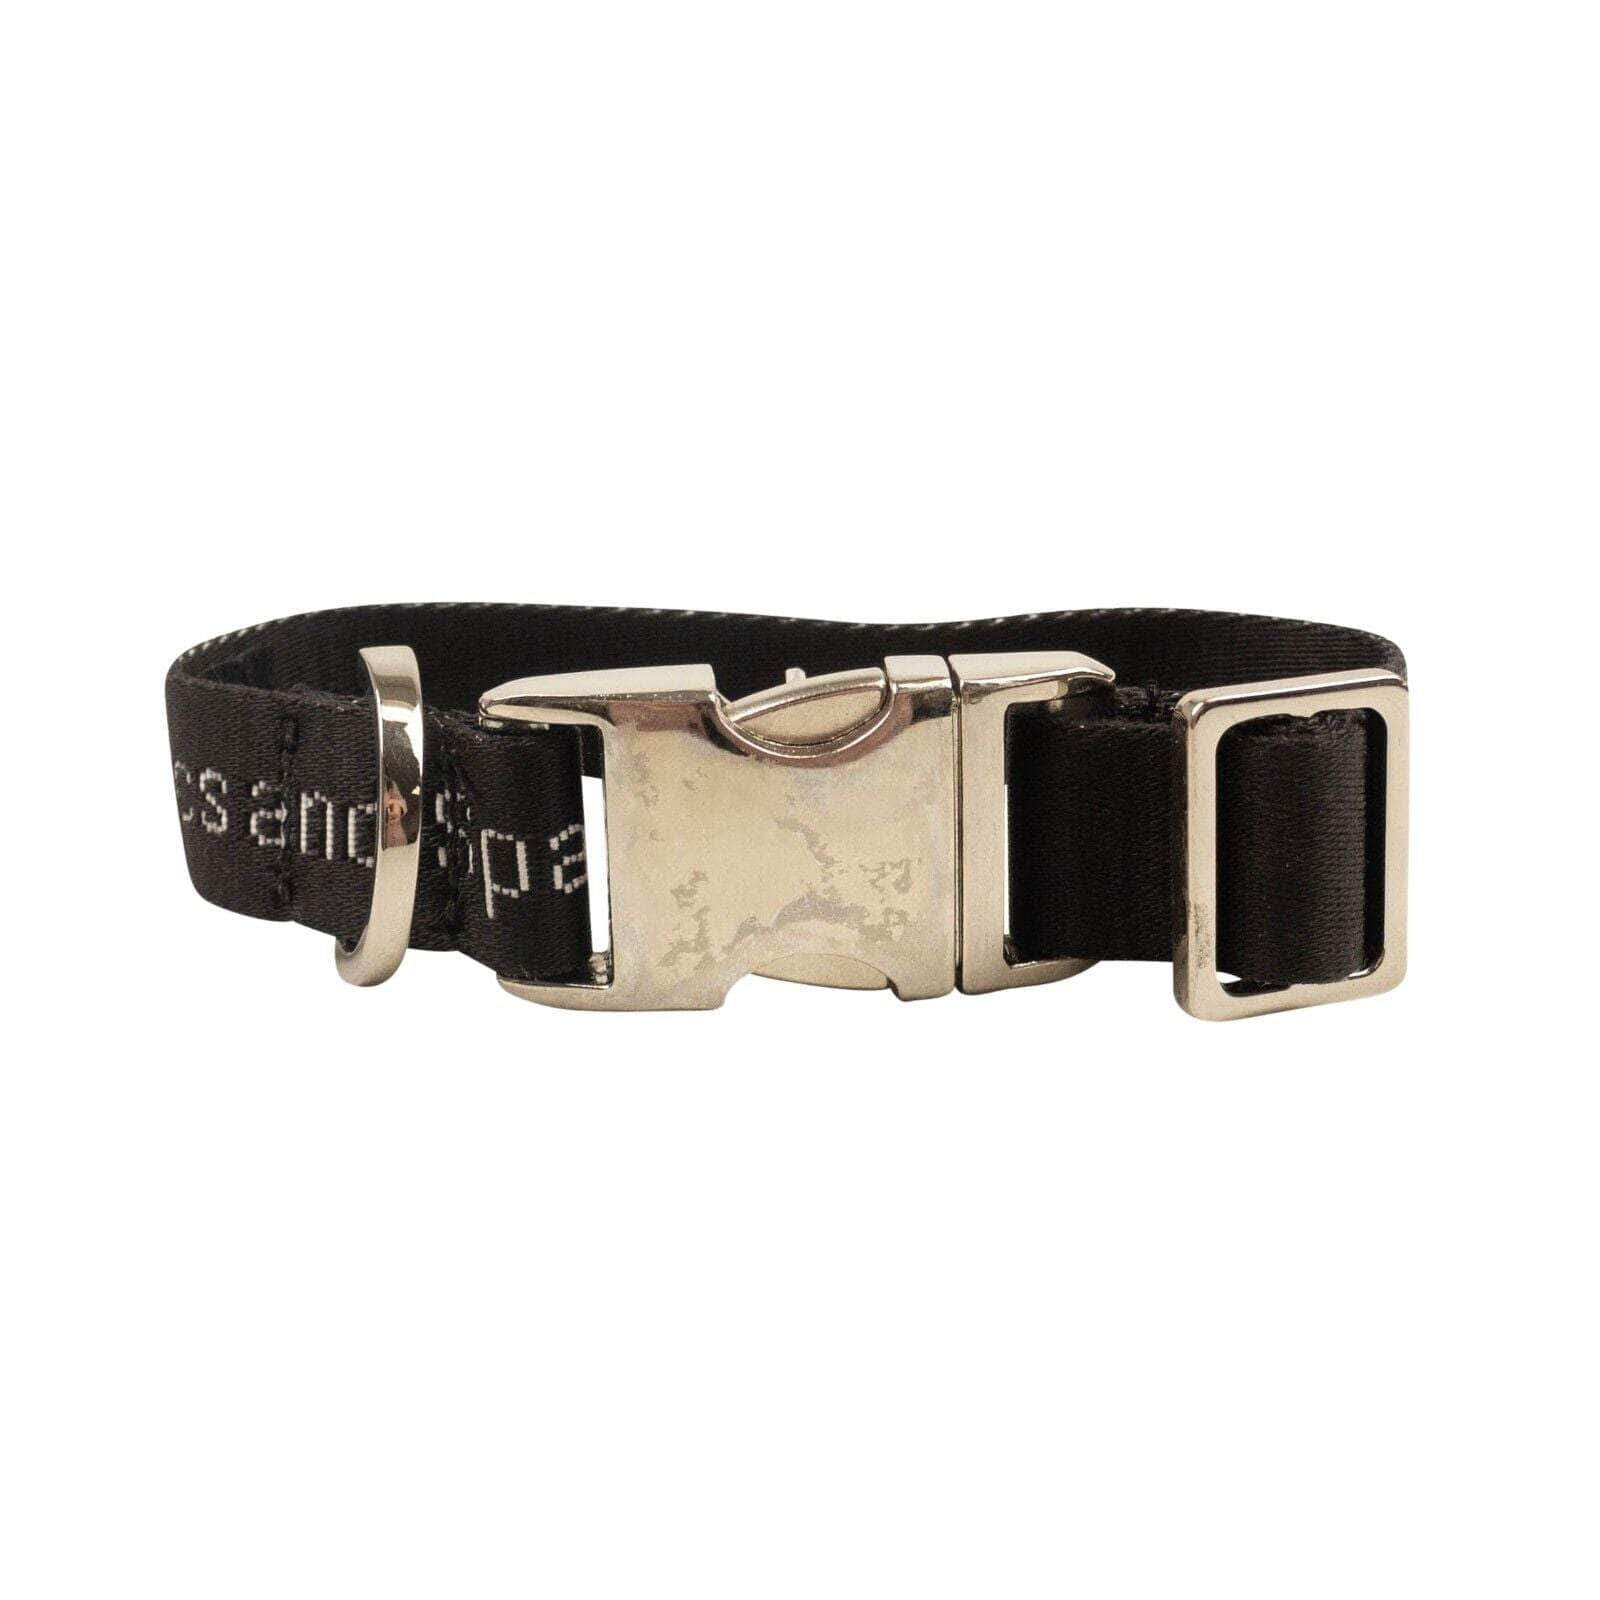 Heron Preston channelenable-all, chicmi, couponcollection, gender-mens, heron-preston, main-accessories, mens-shoes, pet-accessories, size-l, under-250 L Black NASA Dog Collar 82NGG-HP-3051/L 82NGG-HP-3051/L